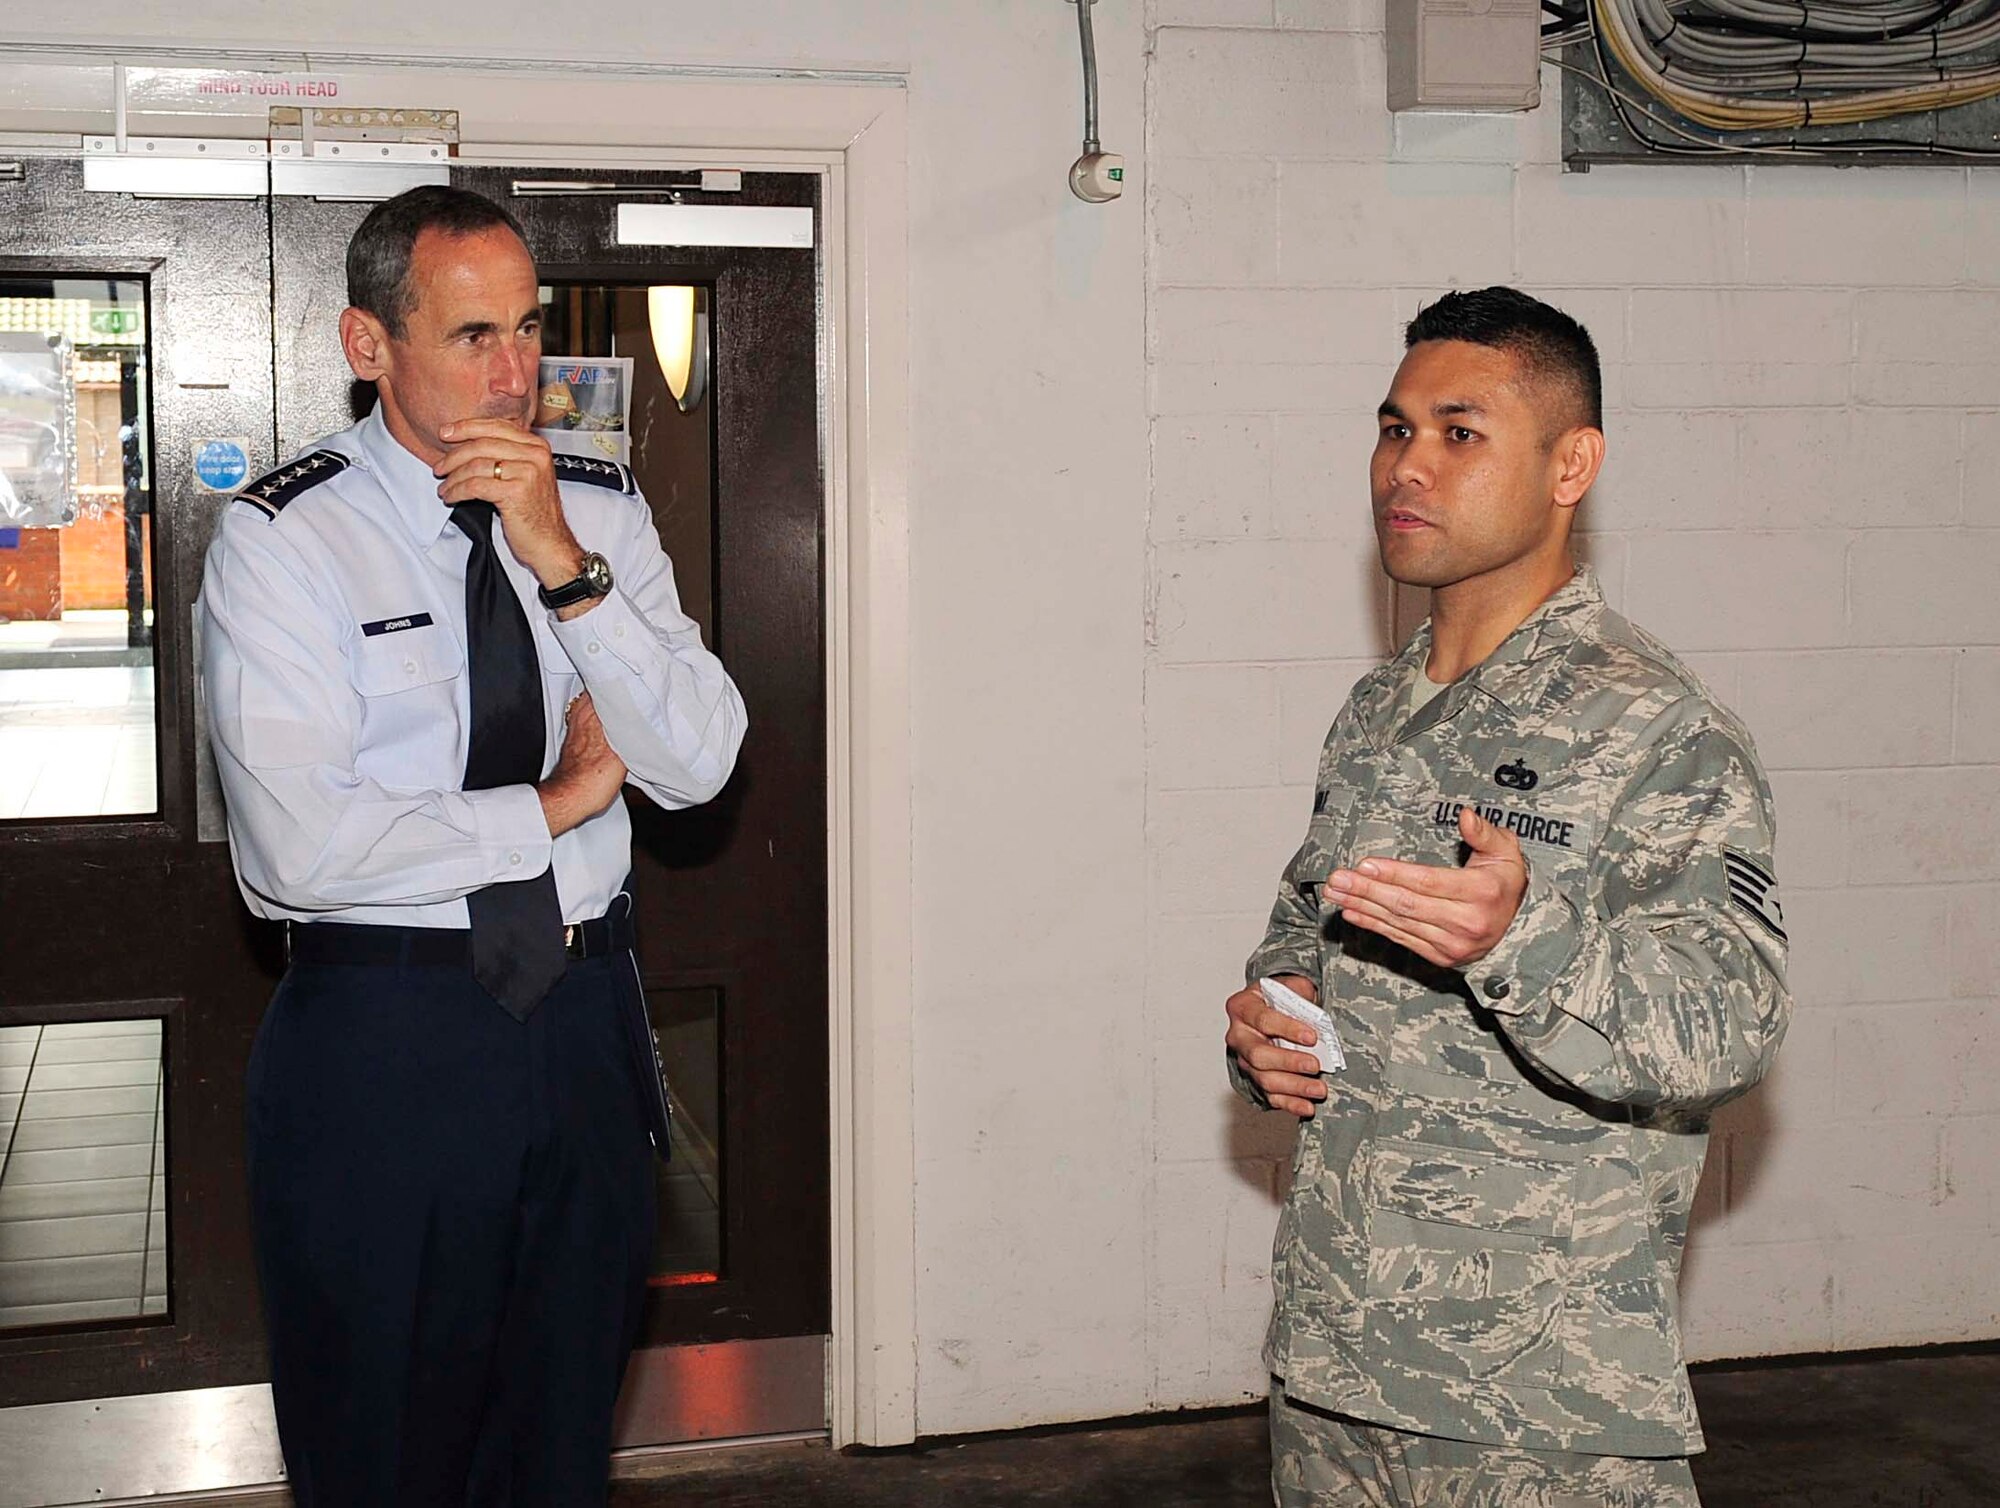 RAF MILDENHALL, England – Staff Sgt. Jaymhar Caoile, 727th Air Mobility Squadron freight services supervisor, briefs Gen. Raymond Johns, Air Mobility Command commander, during a visit to RAF Mildenhall,  July 5, 2012. Caoile explained the day-to-day operations of the 727th AMS freight services. (U.S. Air Force photo/Senior Airman Ethan Morgan)